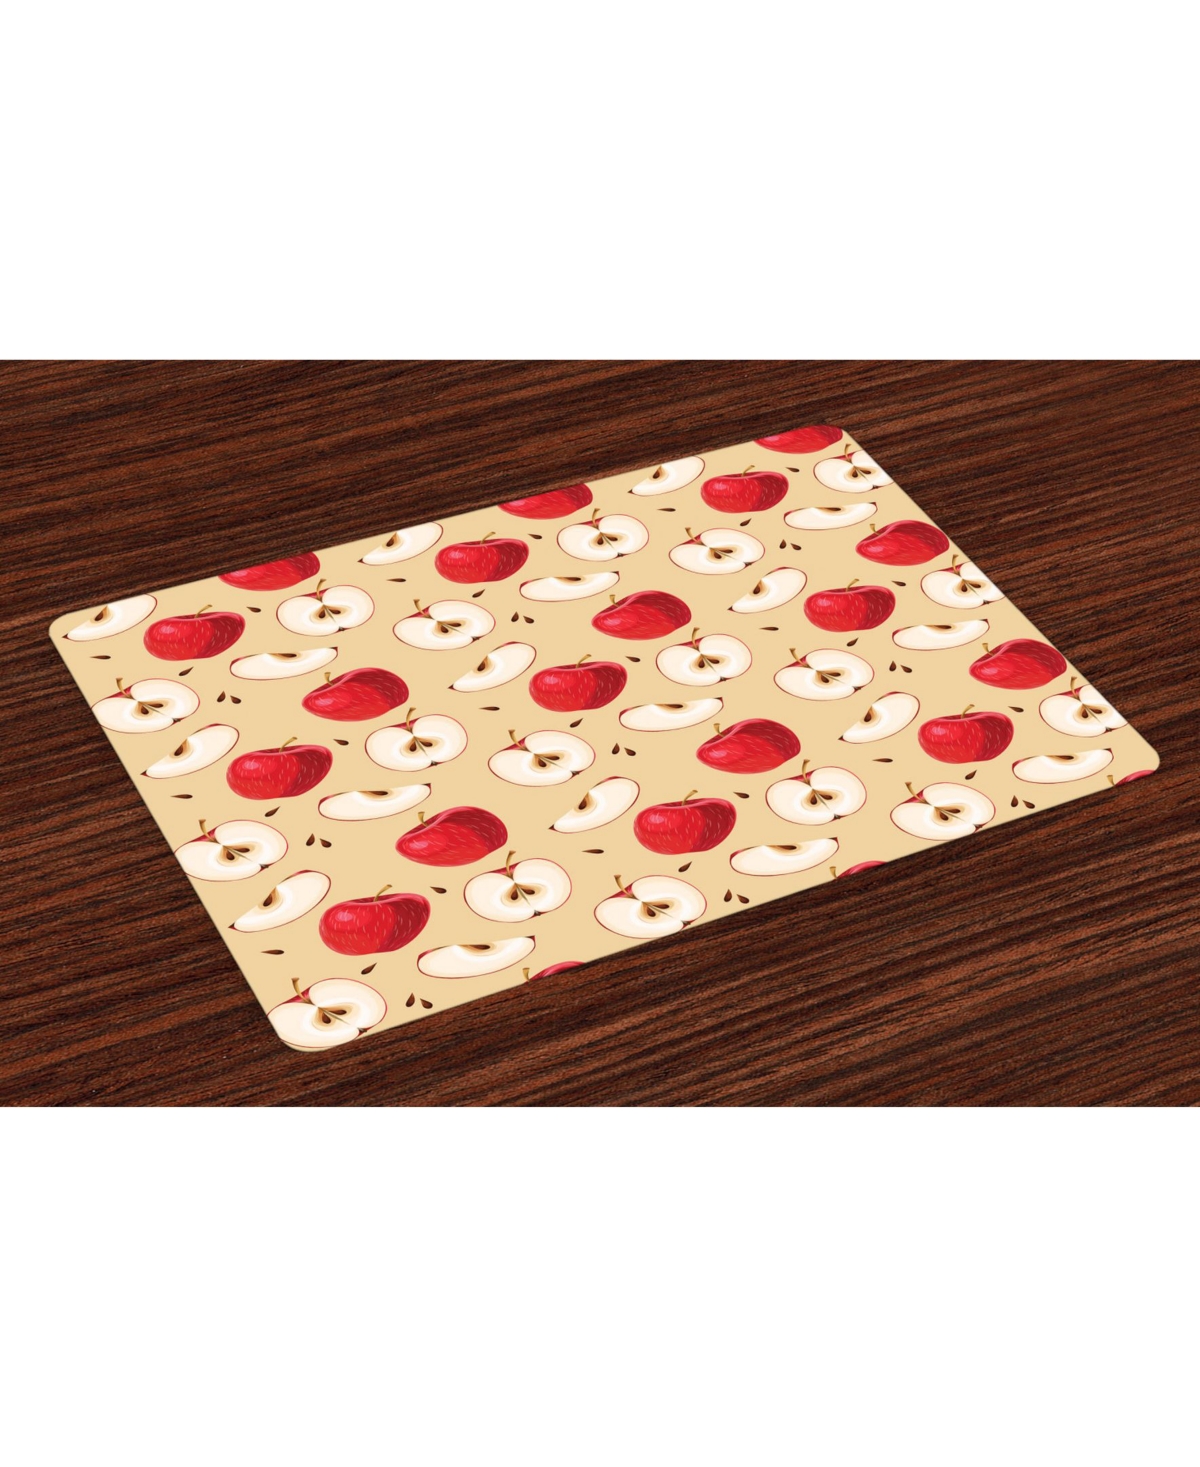 AMBESONNE APPLE PLACE MATS, SET OF 4